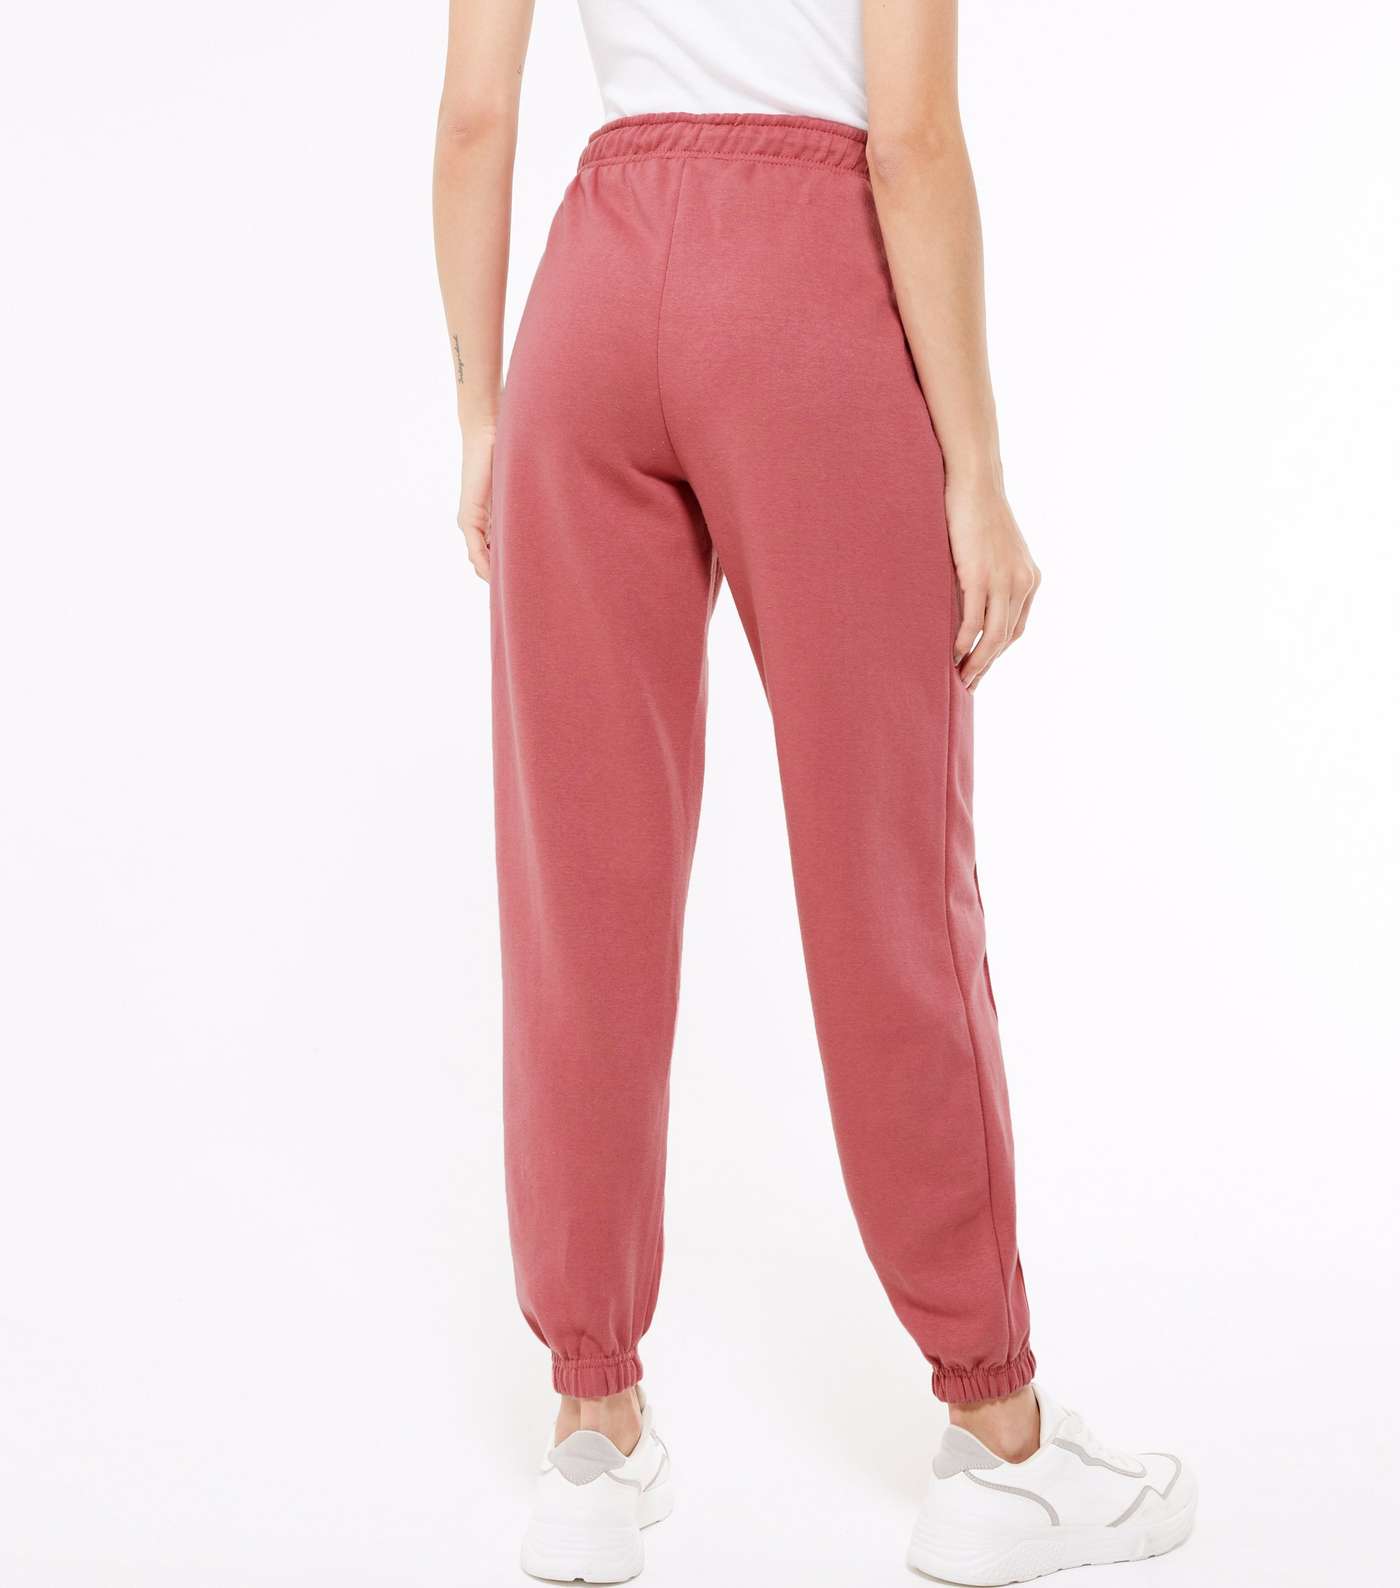 Deep Pink Seam Front Cuffed Joggers Image 3